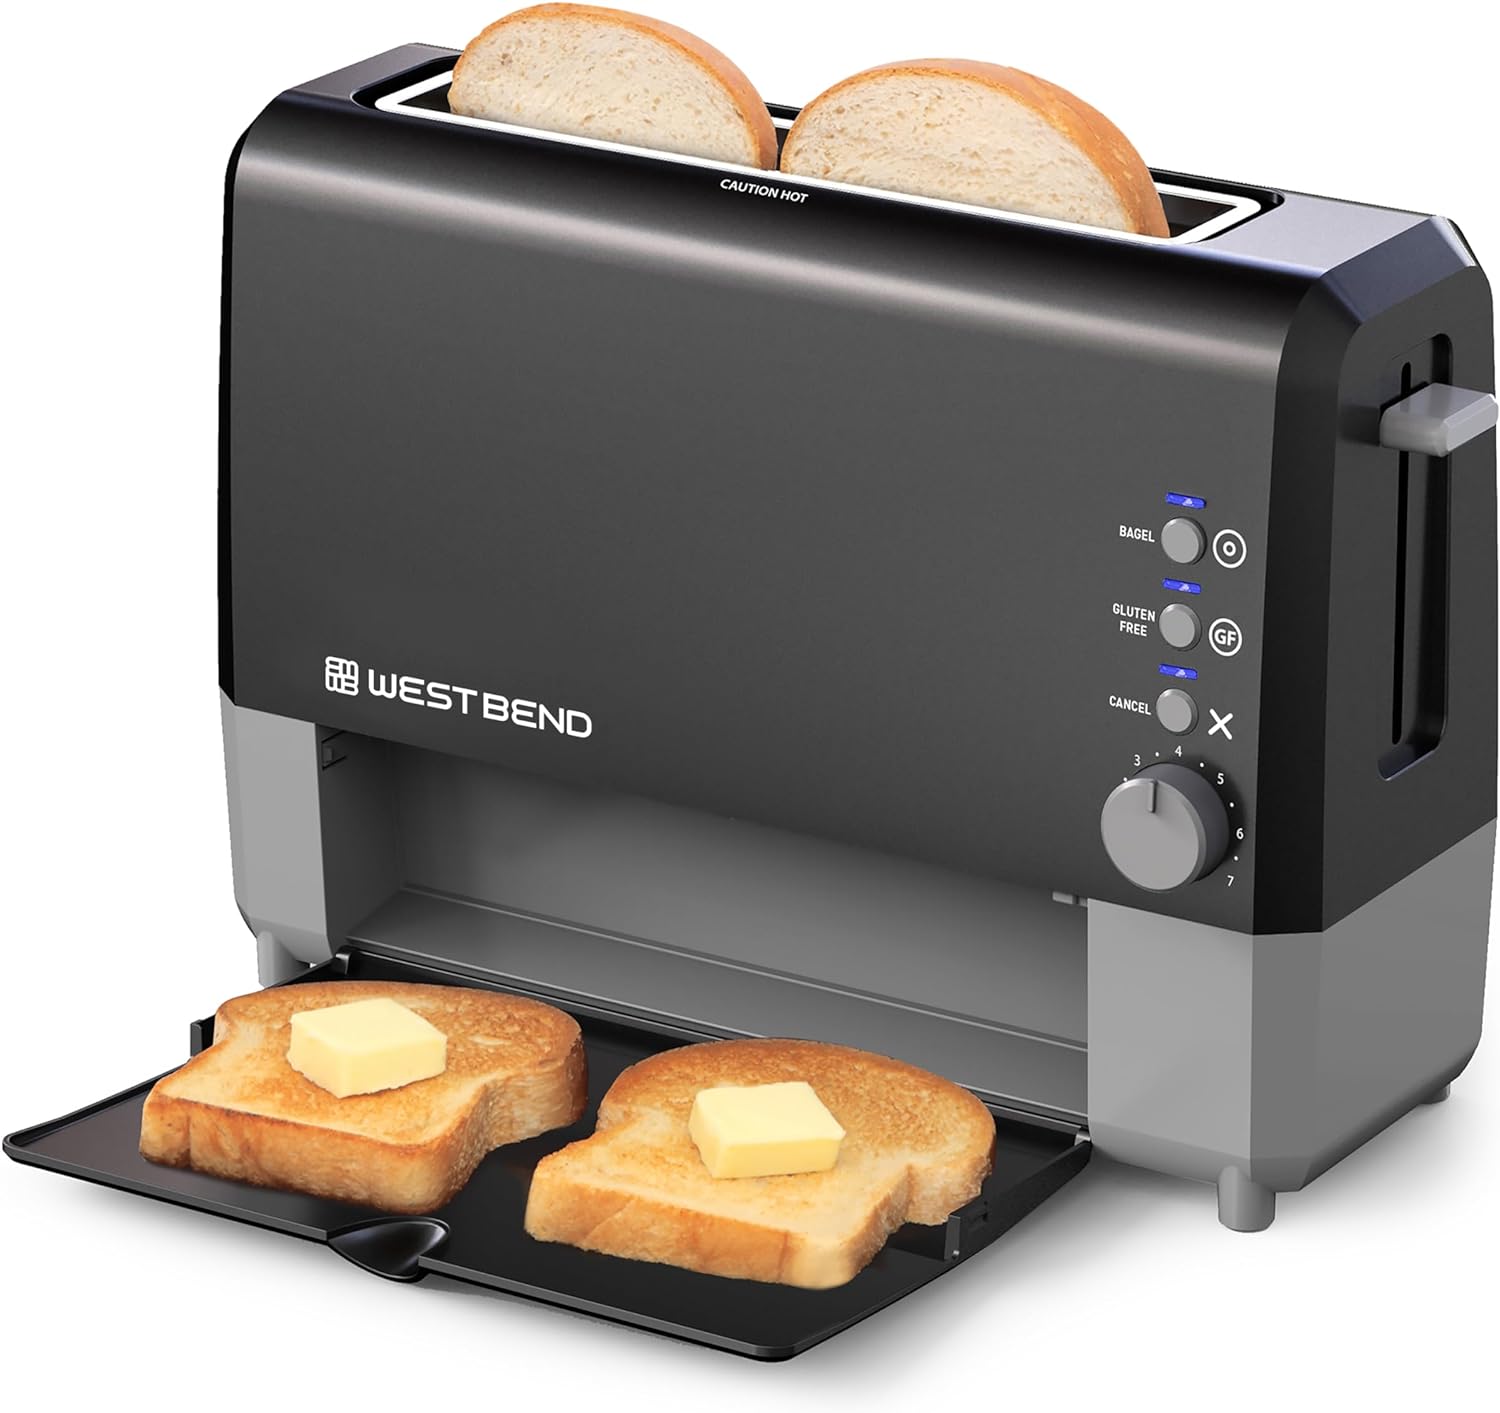 West Bend 77224 QuikServe Slide Through Wide Slot Toaster with Cool Touch Exterior & Removable Crumb Tray, 2-Slice (90 Days Warranty)